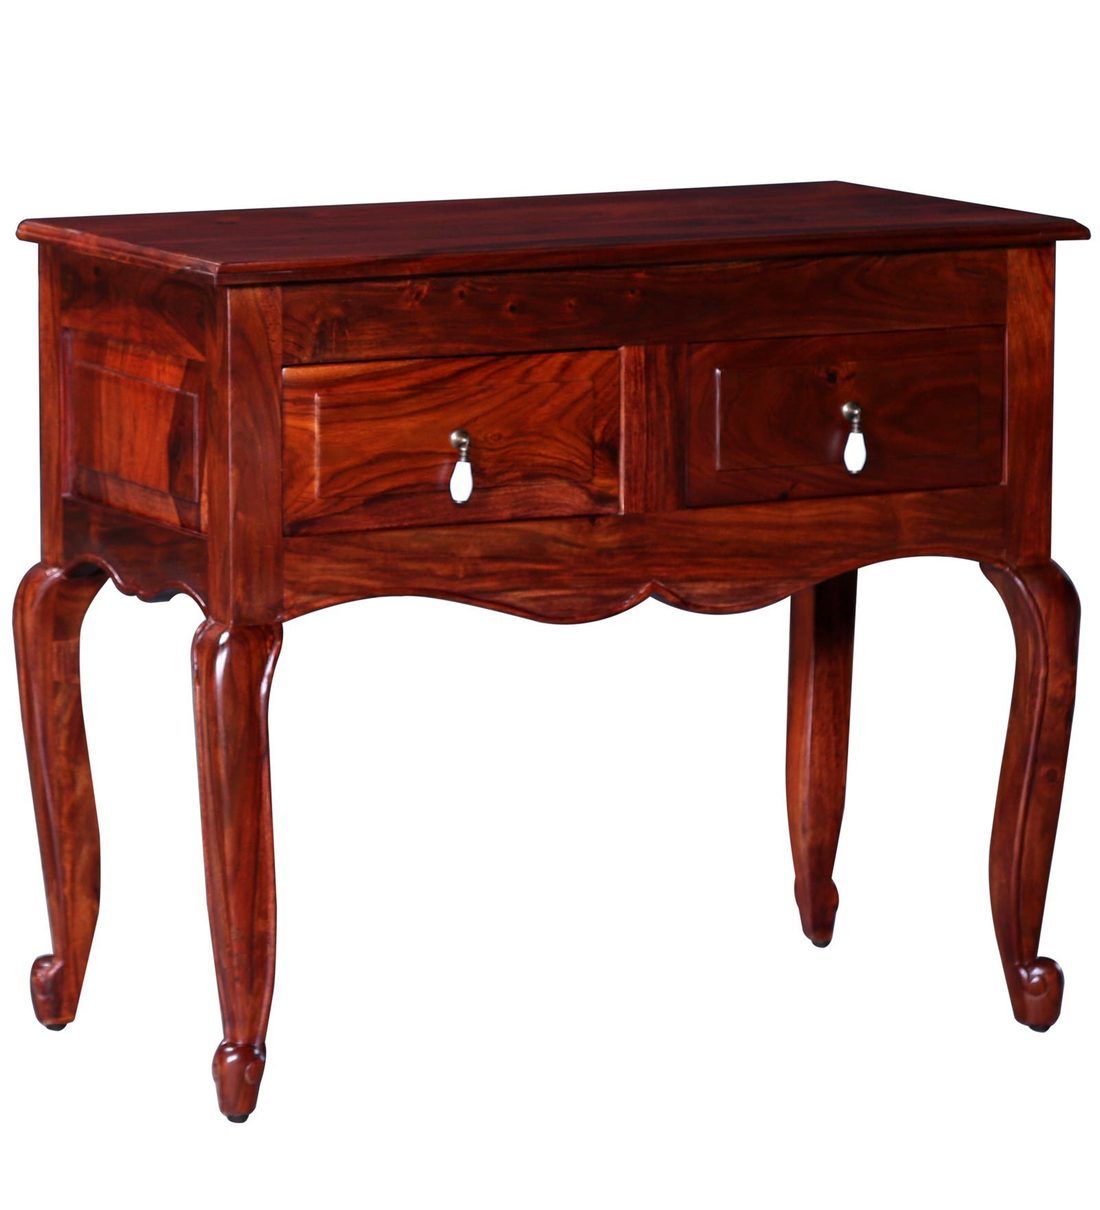 Buy Clifford Solid Wood Console Table In Honey Oak Finish In Honey Oak And Marble Console Tables (View 7 of 20)